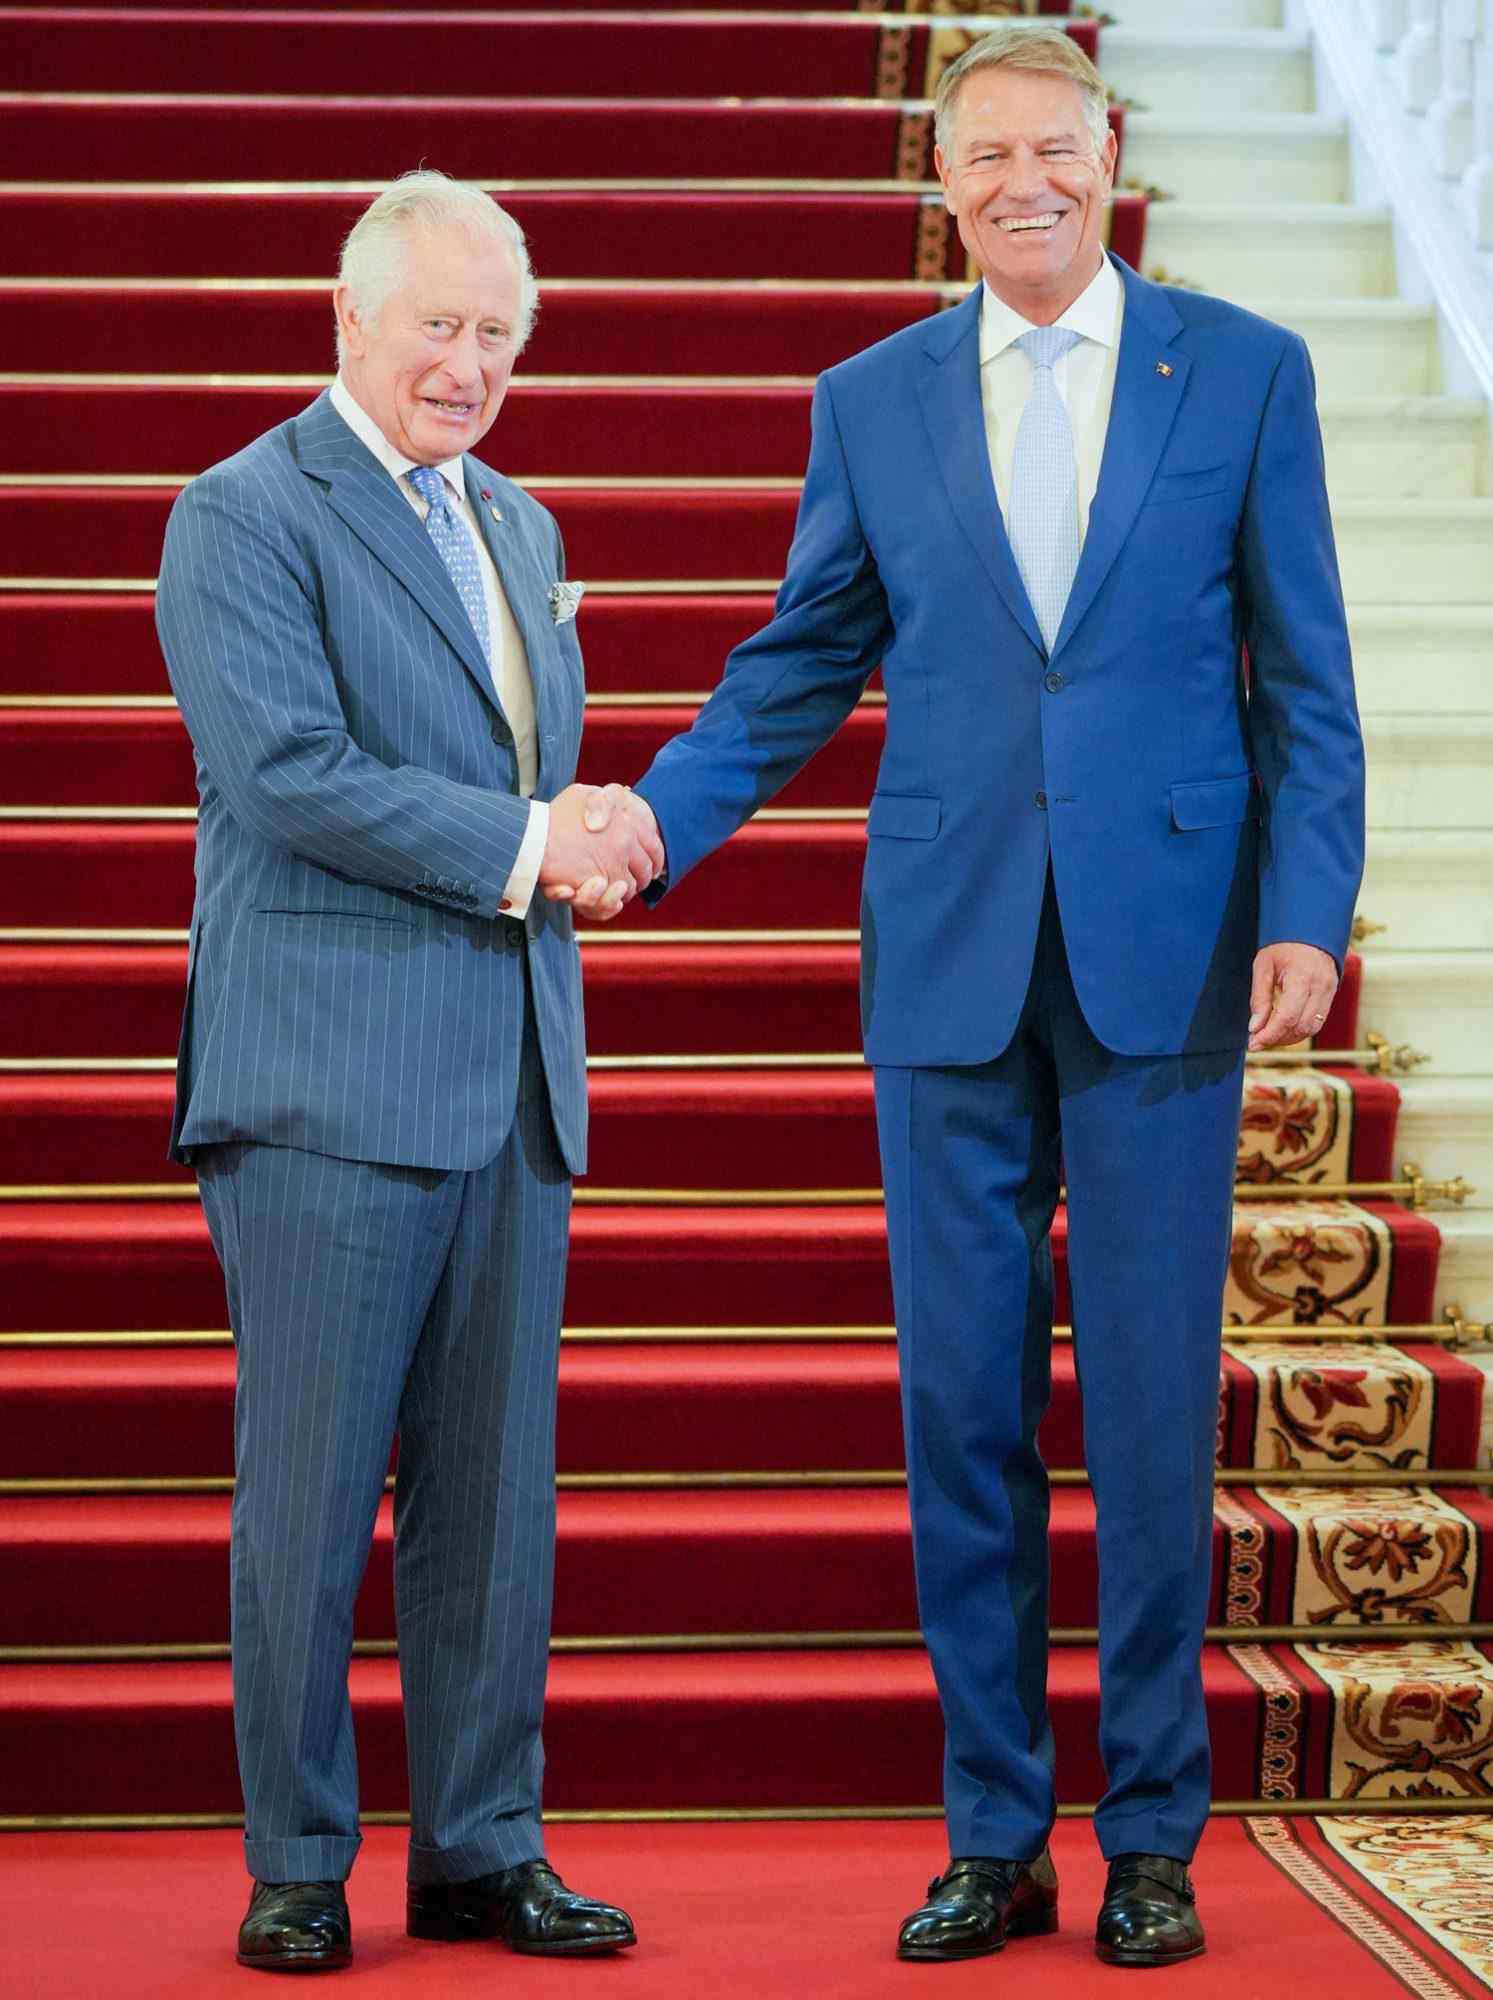 Prince Charles, Prince of Wales (L) is welcomed by Romanian President Klaus Iohannis at the Cotroceni Palace, the Romanian Presidency headquarters in Bucharest, Romania